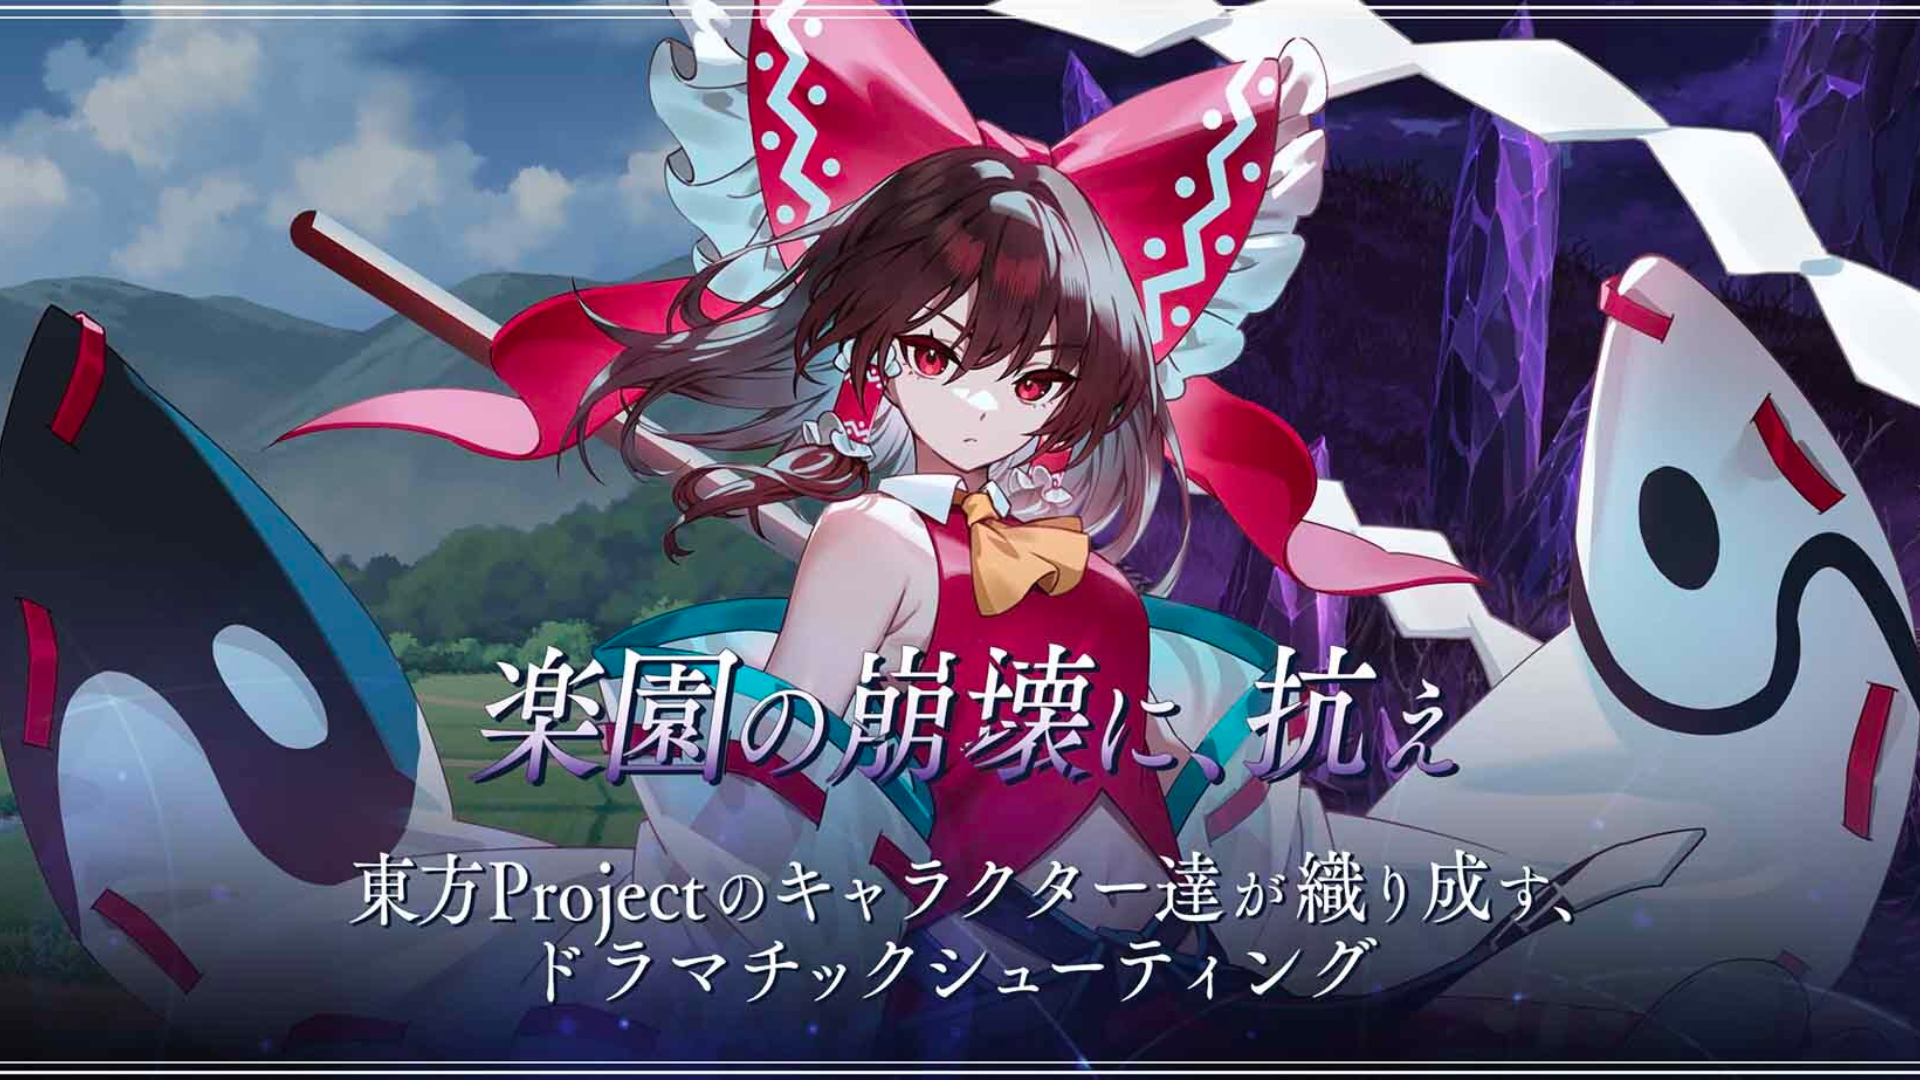 Banner of touhou fantasy eclipse 1.11.0